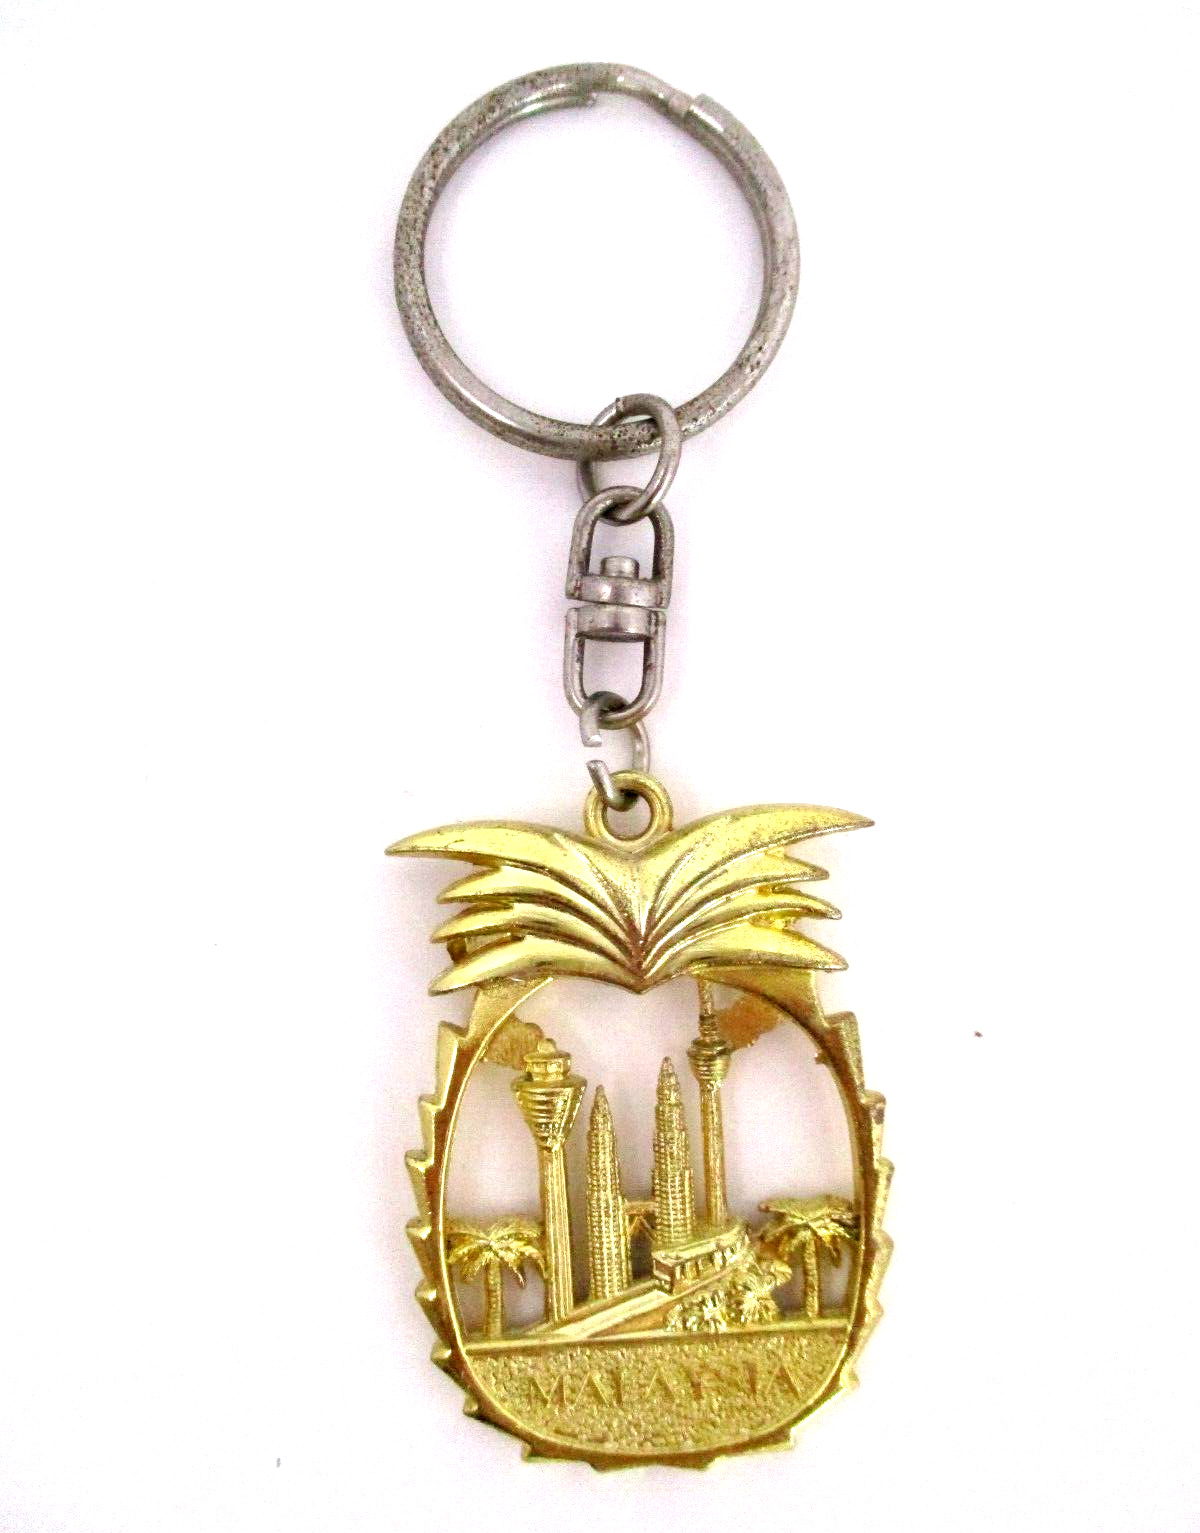 Malaysia Keychain Souvenir Pineapple Shaped Key Ring Travel Collectible